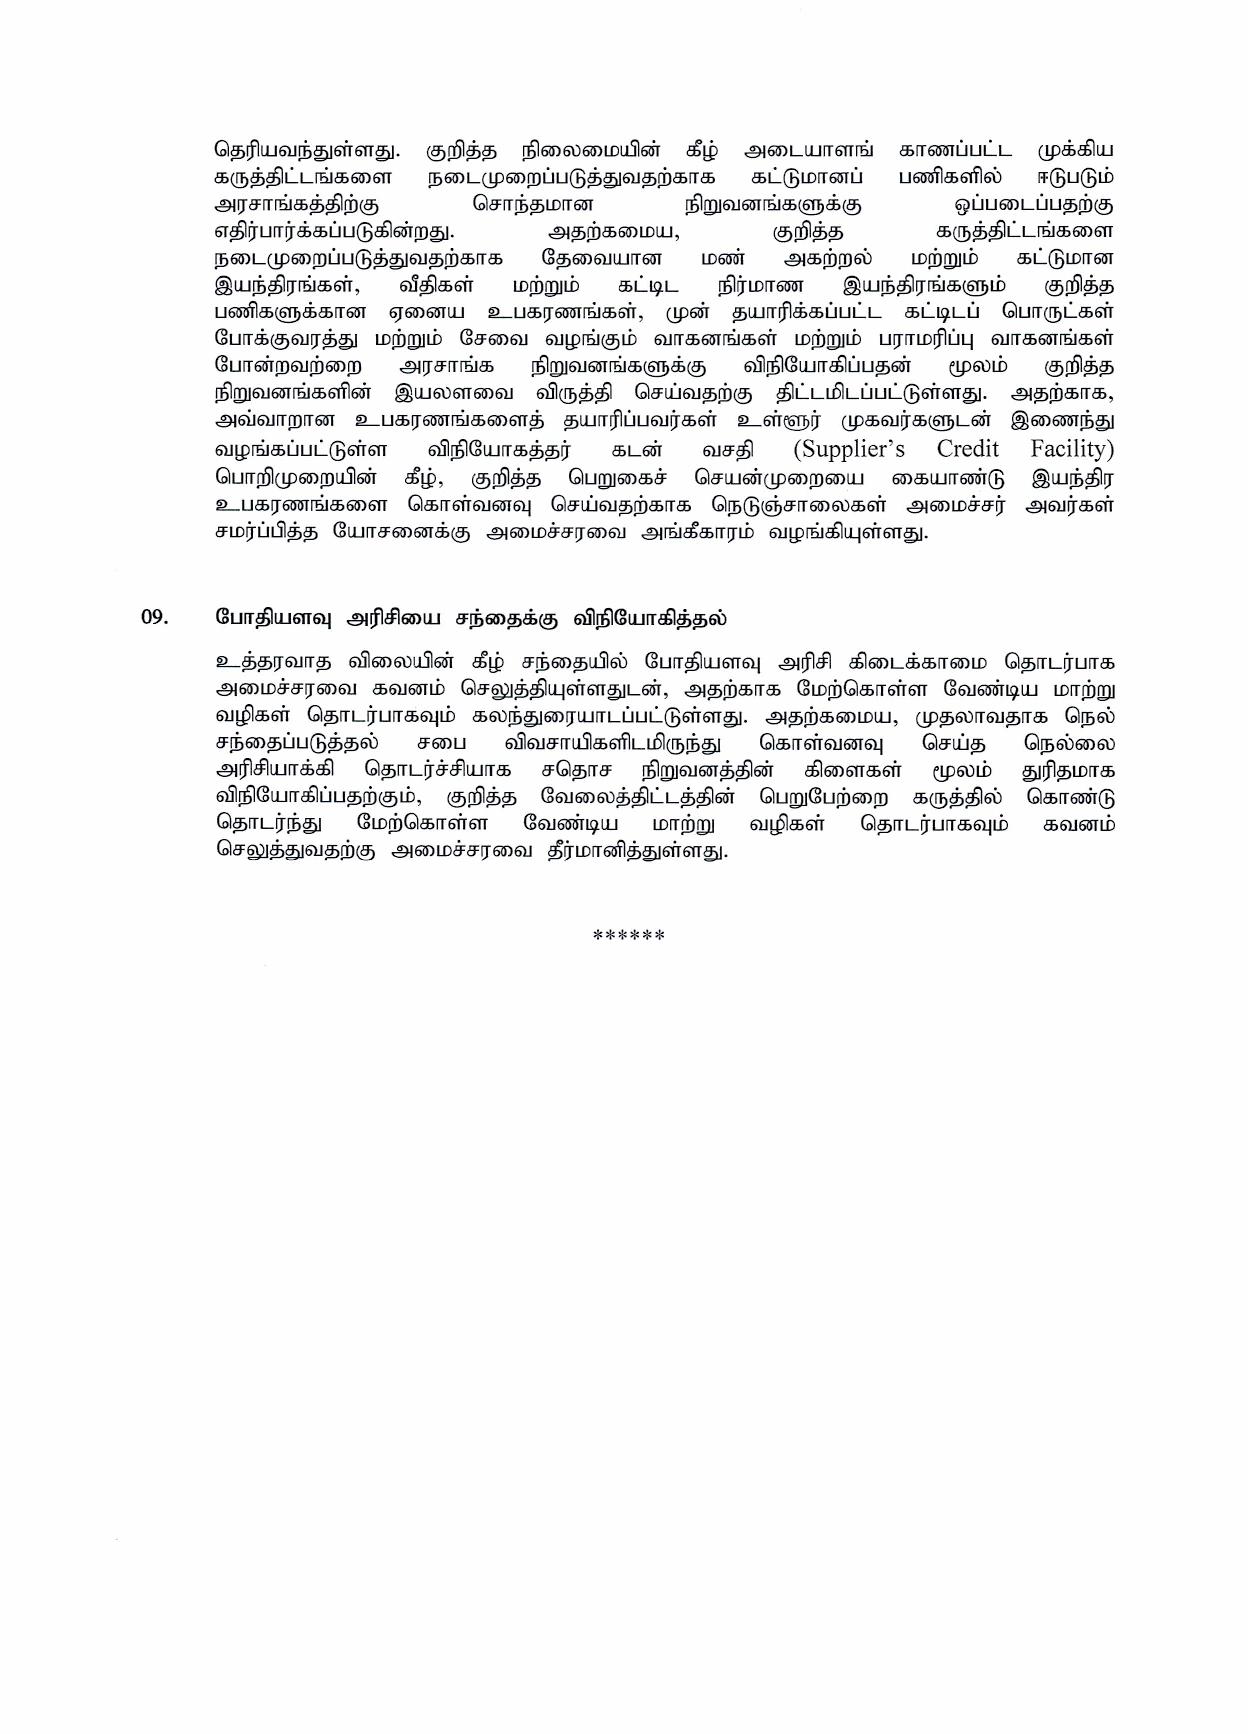 Cabinet Decision on 15.03.2021 Tamil page 004